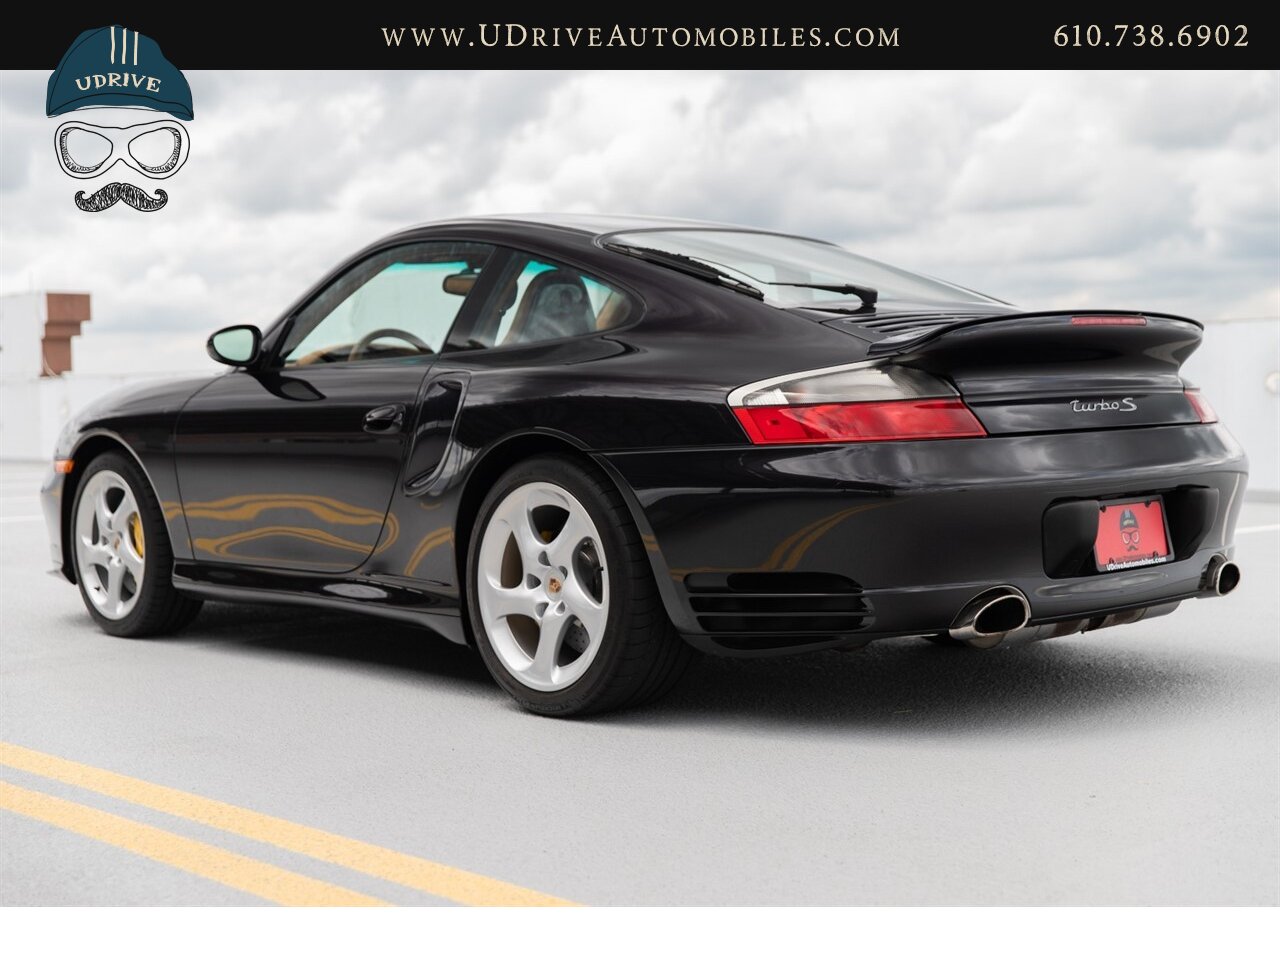 2005 Porsche 911 Turbo S 6 Speed 14k Miles Sport Sts Painted Backs  Natural Brown Lthr $144,070 MSRP - Photo 22 - West Chester, PA 19382